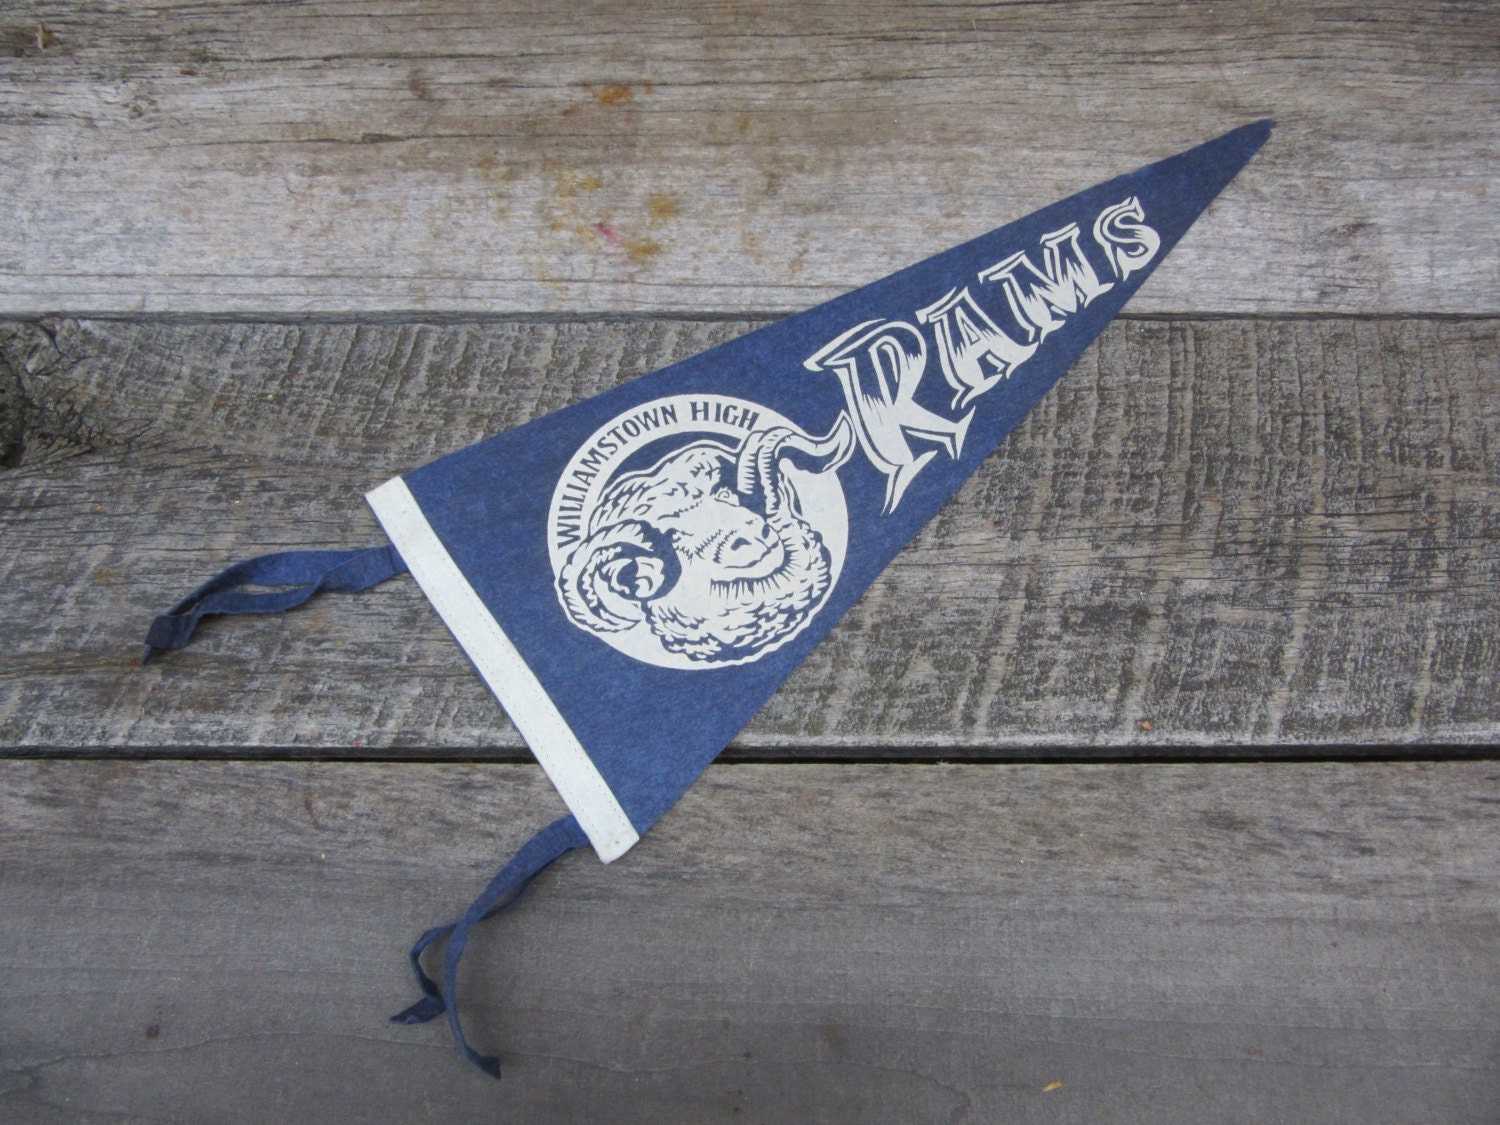 Vintage High School Pennant Williamstown Rams Blue & White 1960S Felt Flag Collectible Sports Decor Gameroom Man Cave